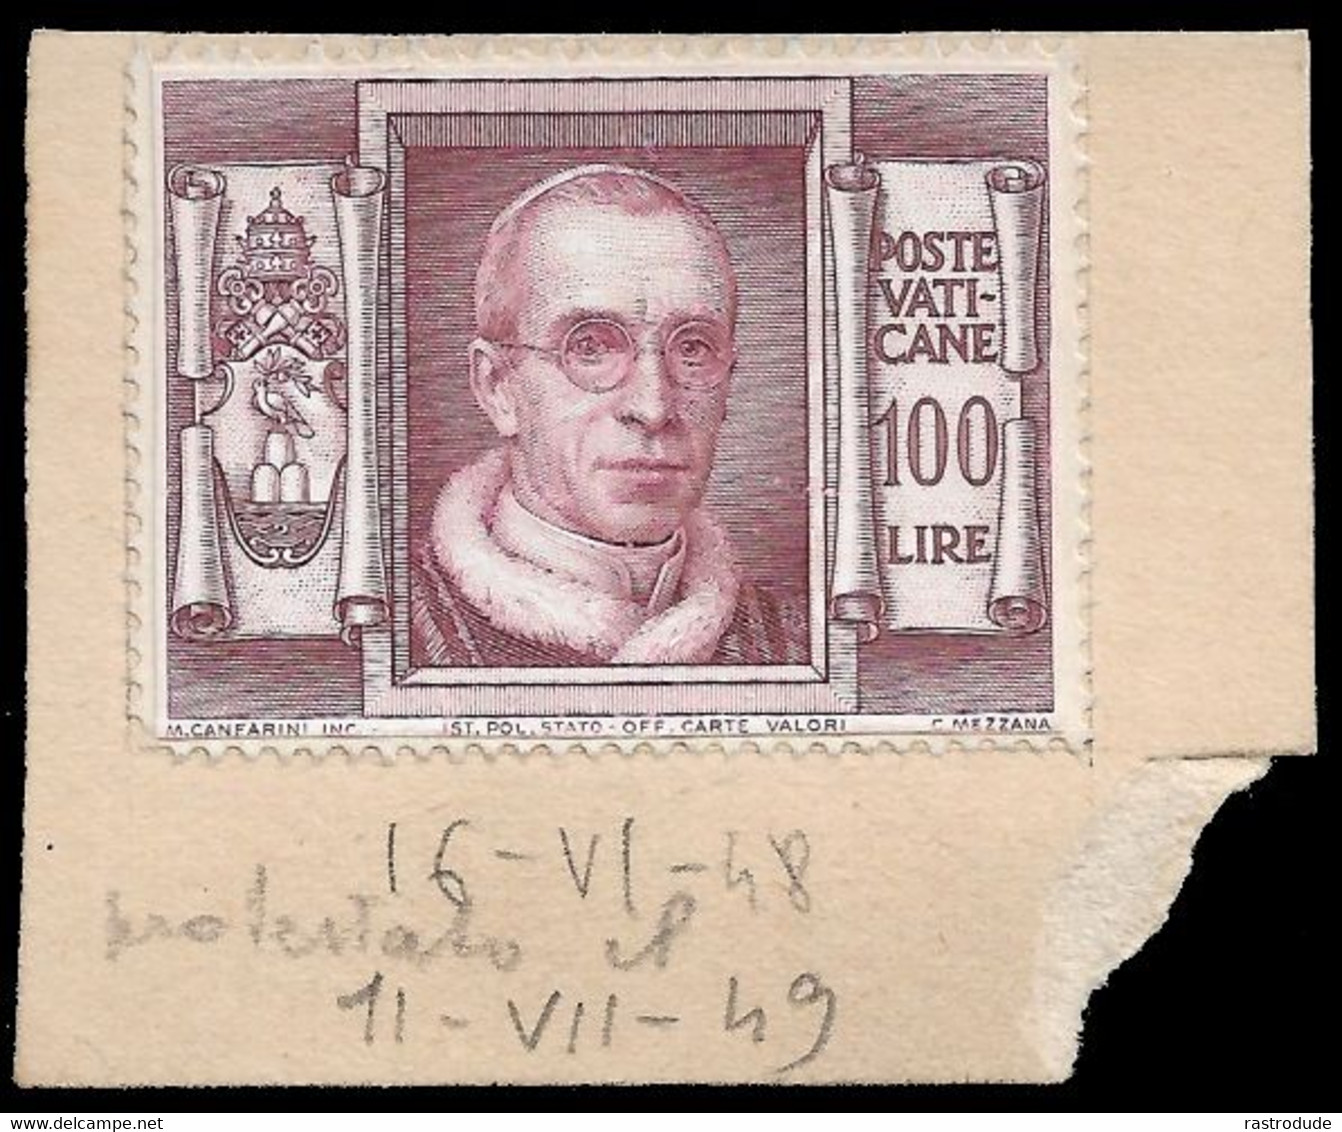 VATICAN CITY - 1948 VERY RARE PROOF / PROVE 100L (Sassone 131) NOT ISSUED COLOR - POPE PIUS XII - Nuevos